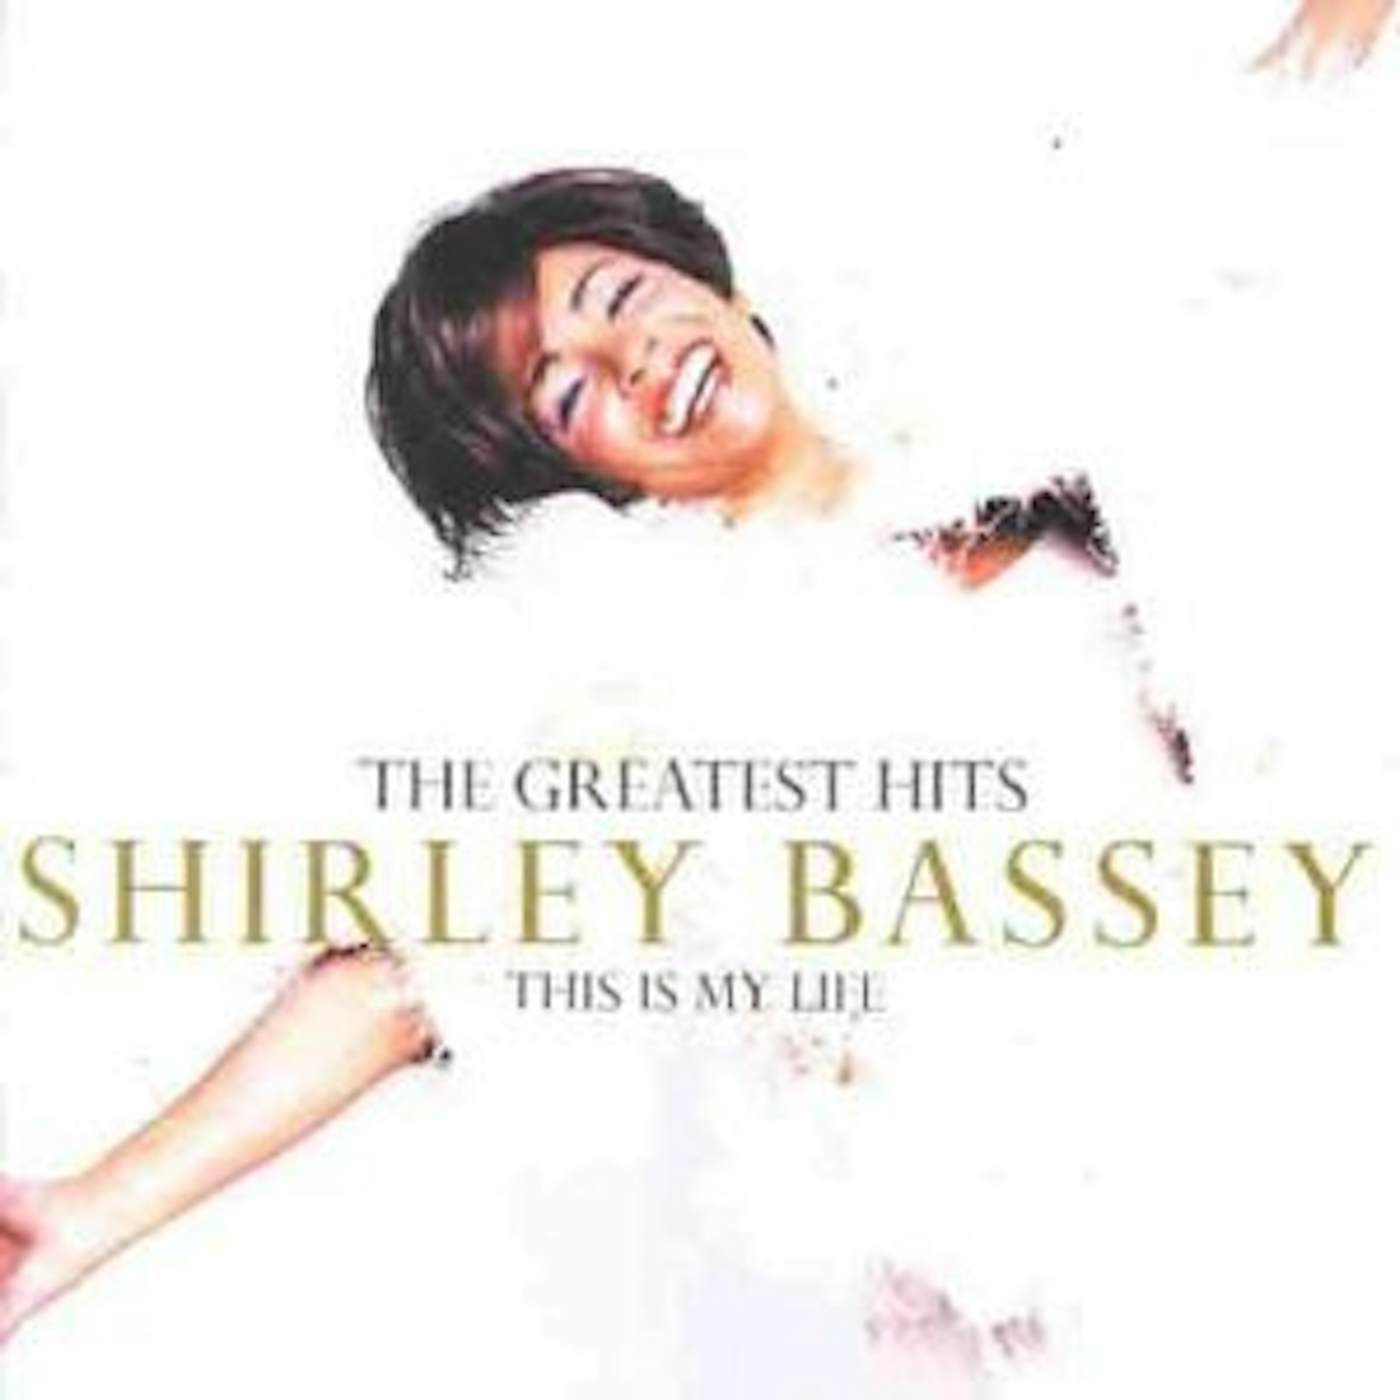 Shirley Bassey THIS IS MY LIFE: GREATEST HITS CD